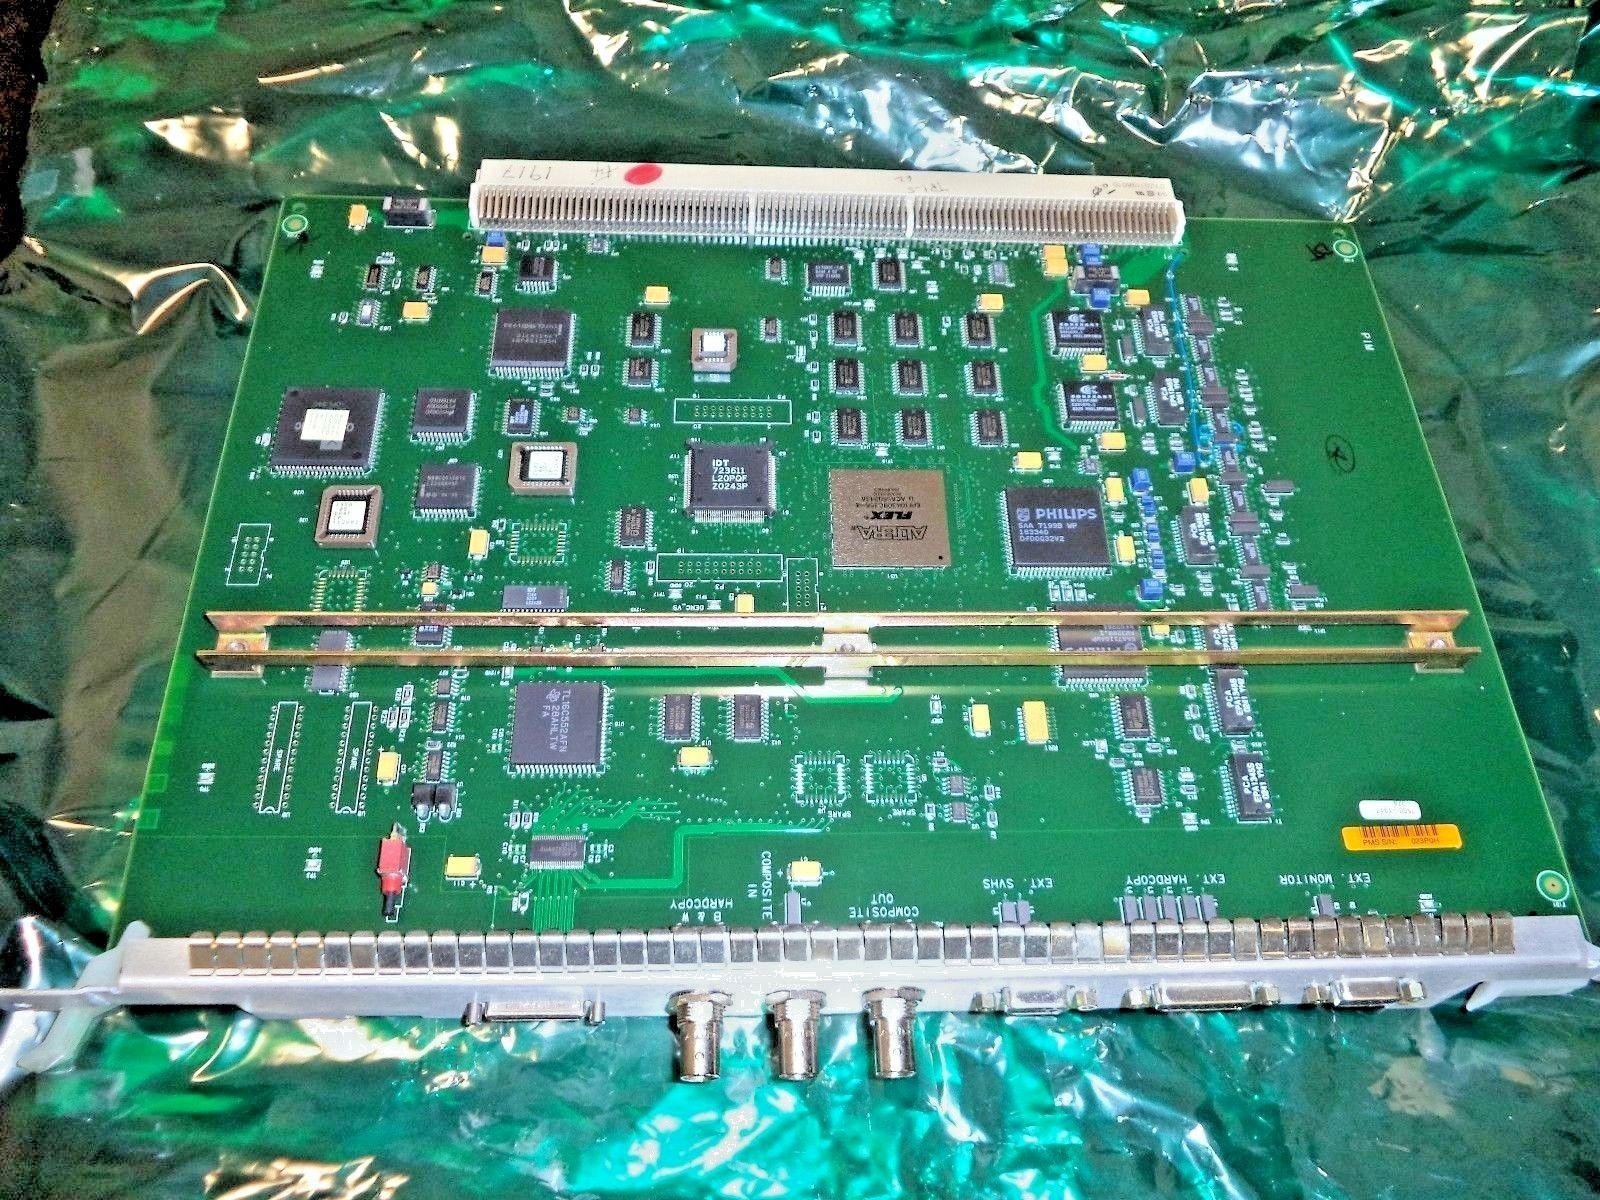 a close up of a computer motherboard on a plastic bag